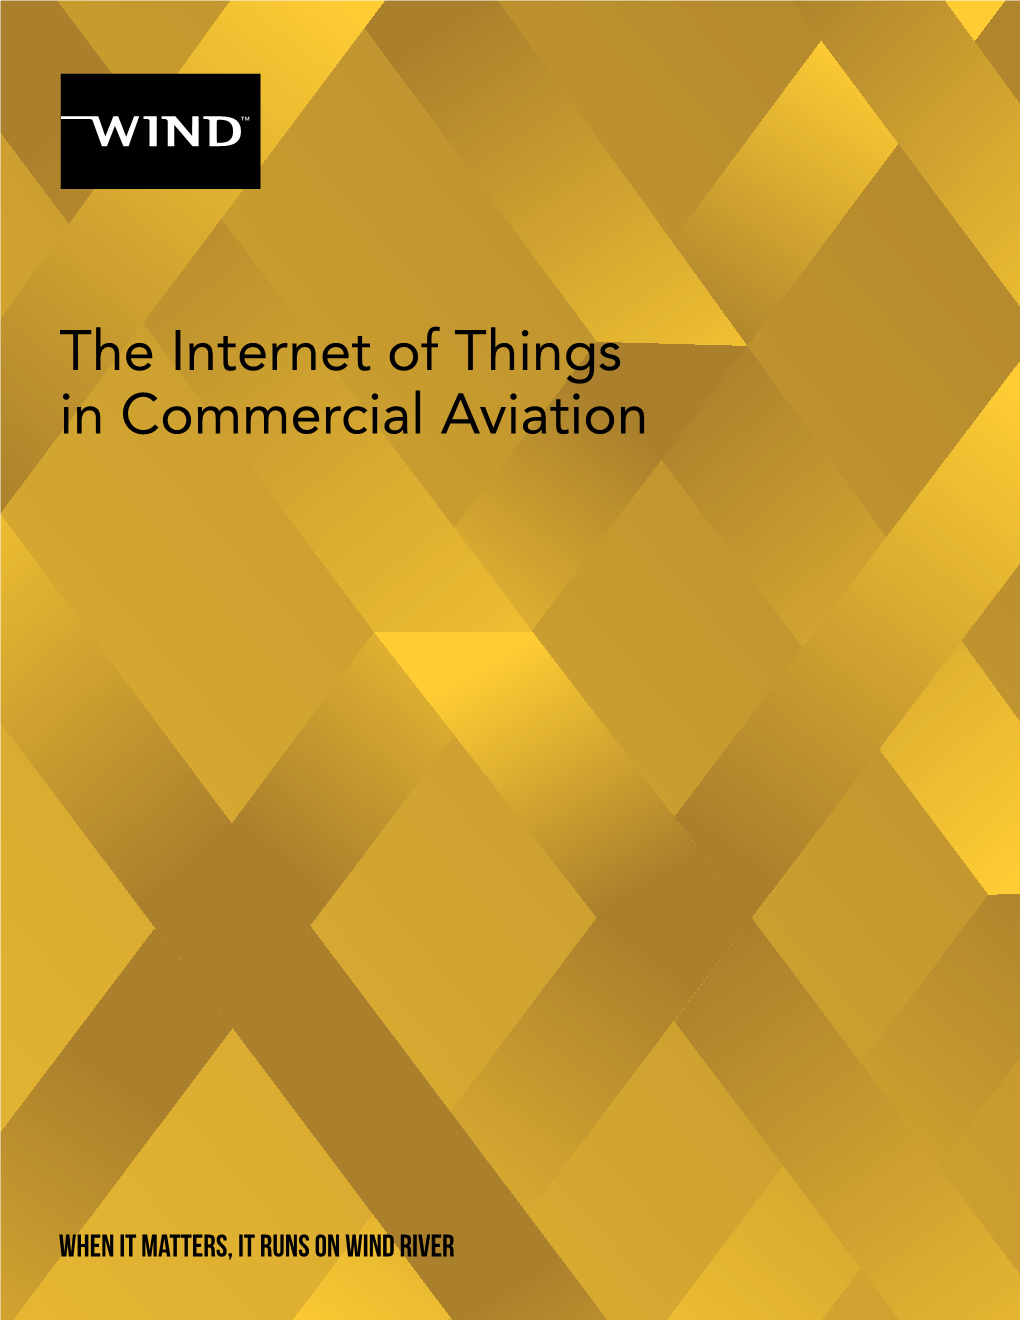 The Internet of Things in Commercial Aviation